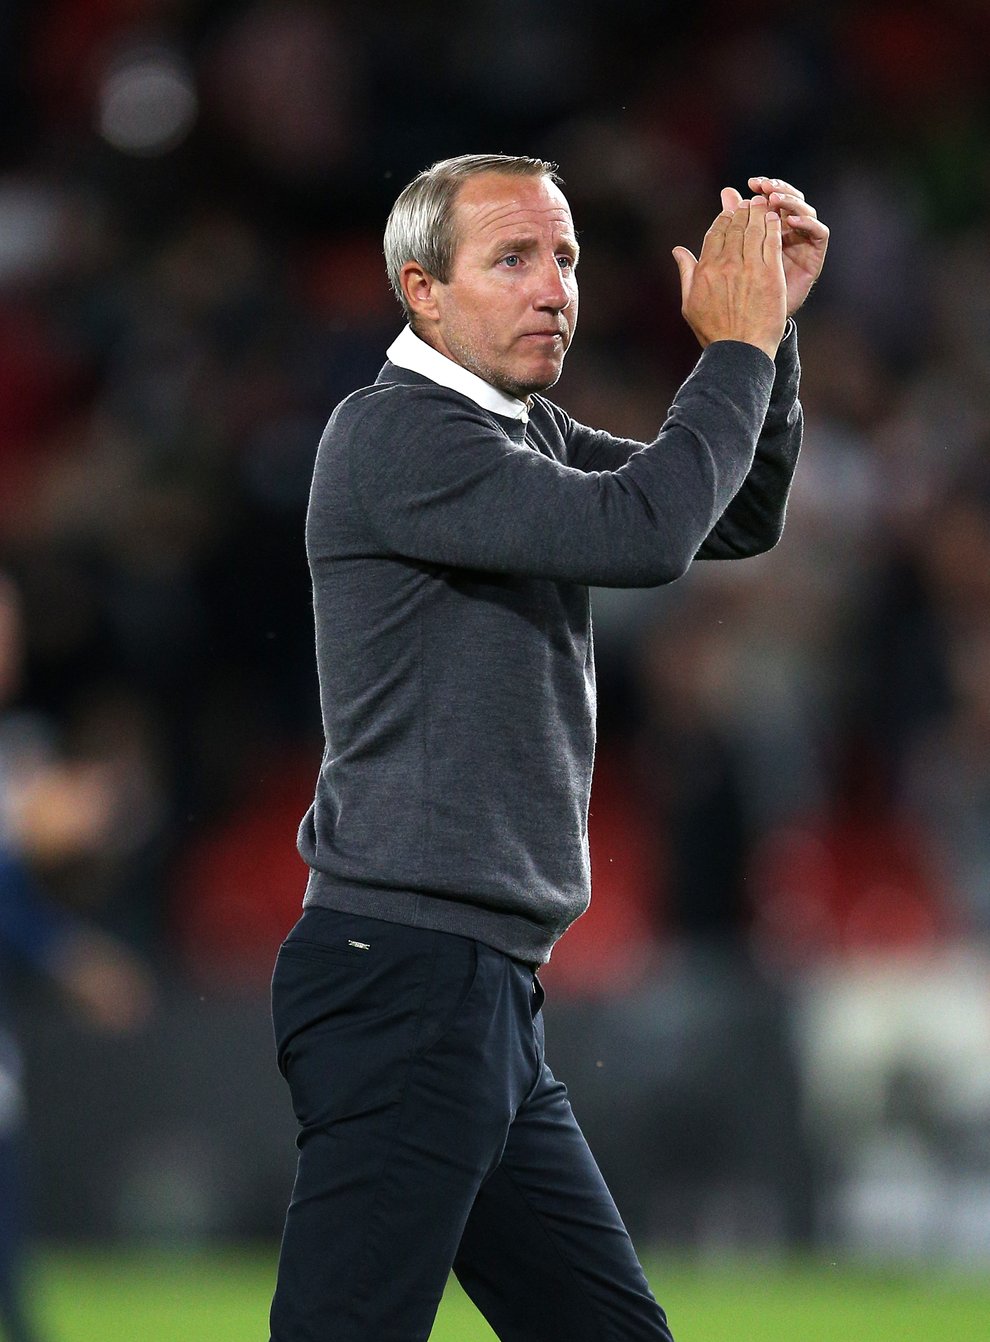 Birmingham City manager Lee Bowyer applauds the fans after the final whistle (Nigel French/PA)